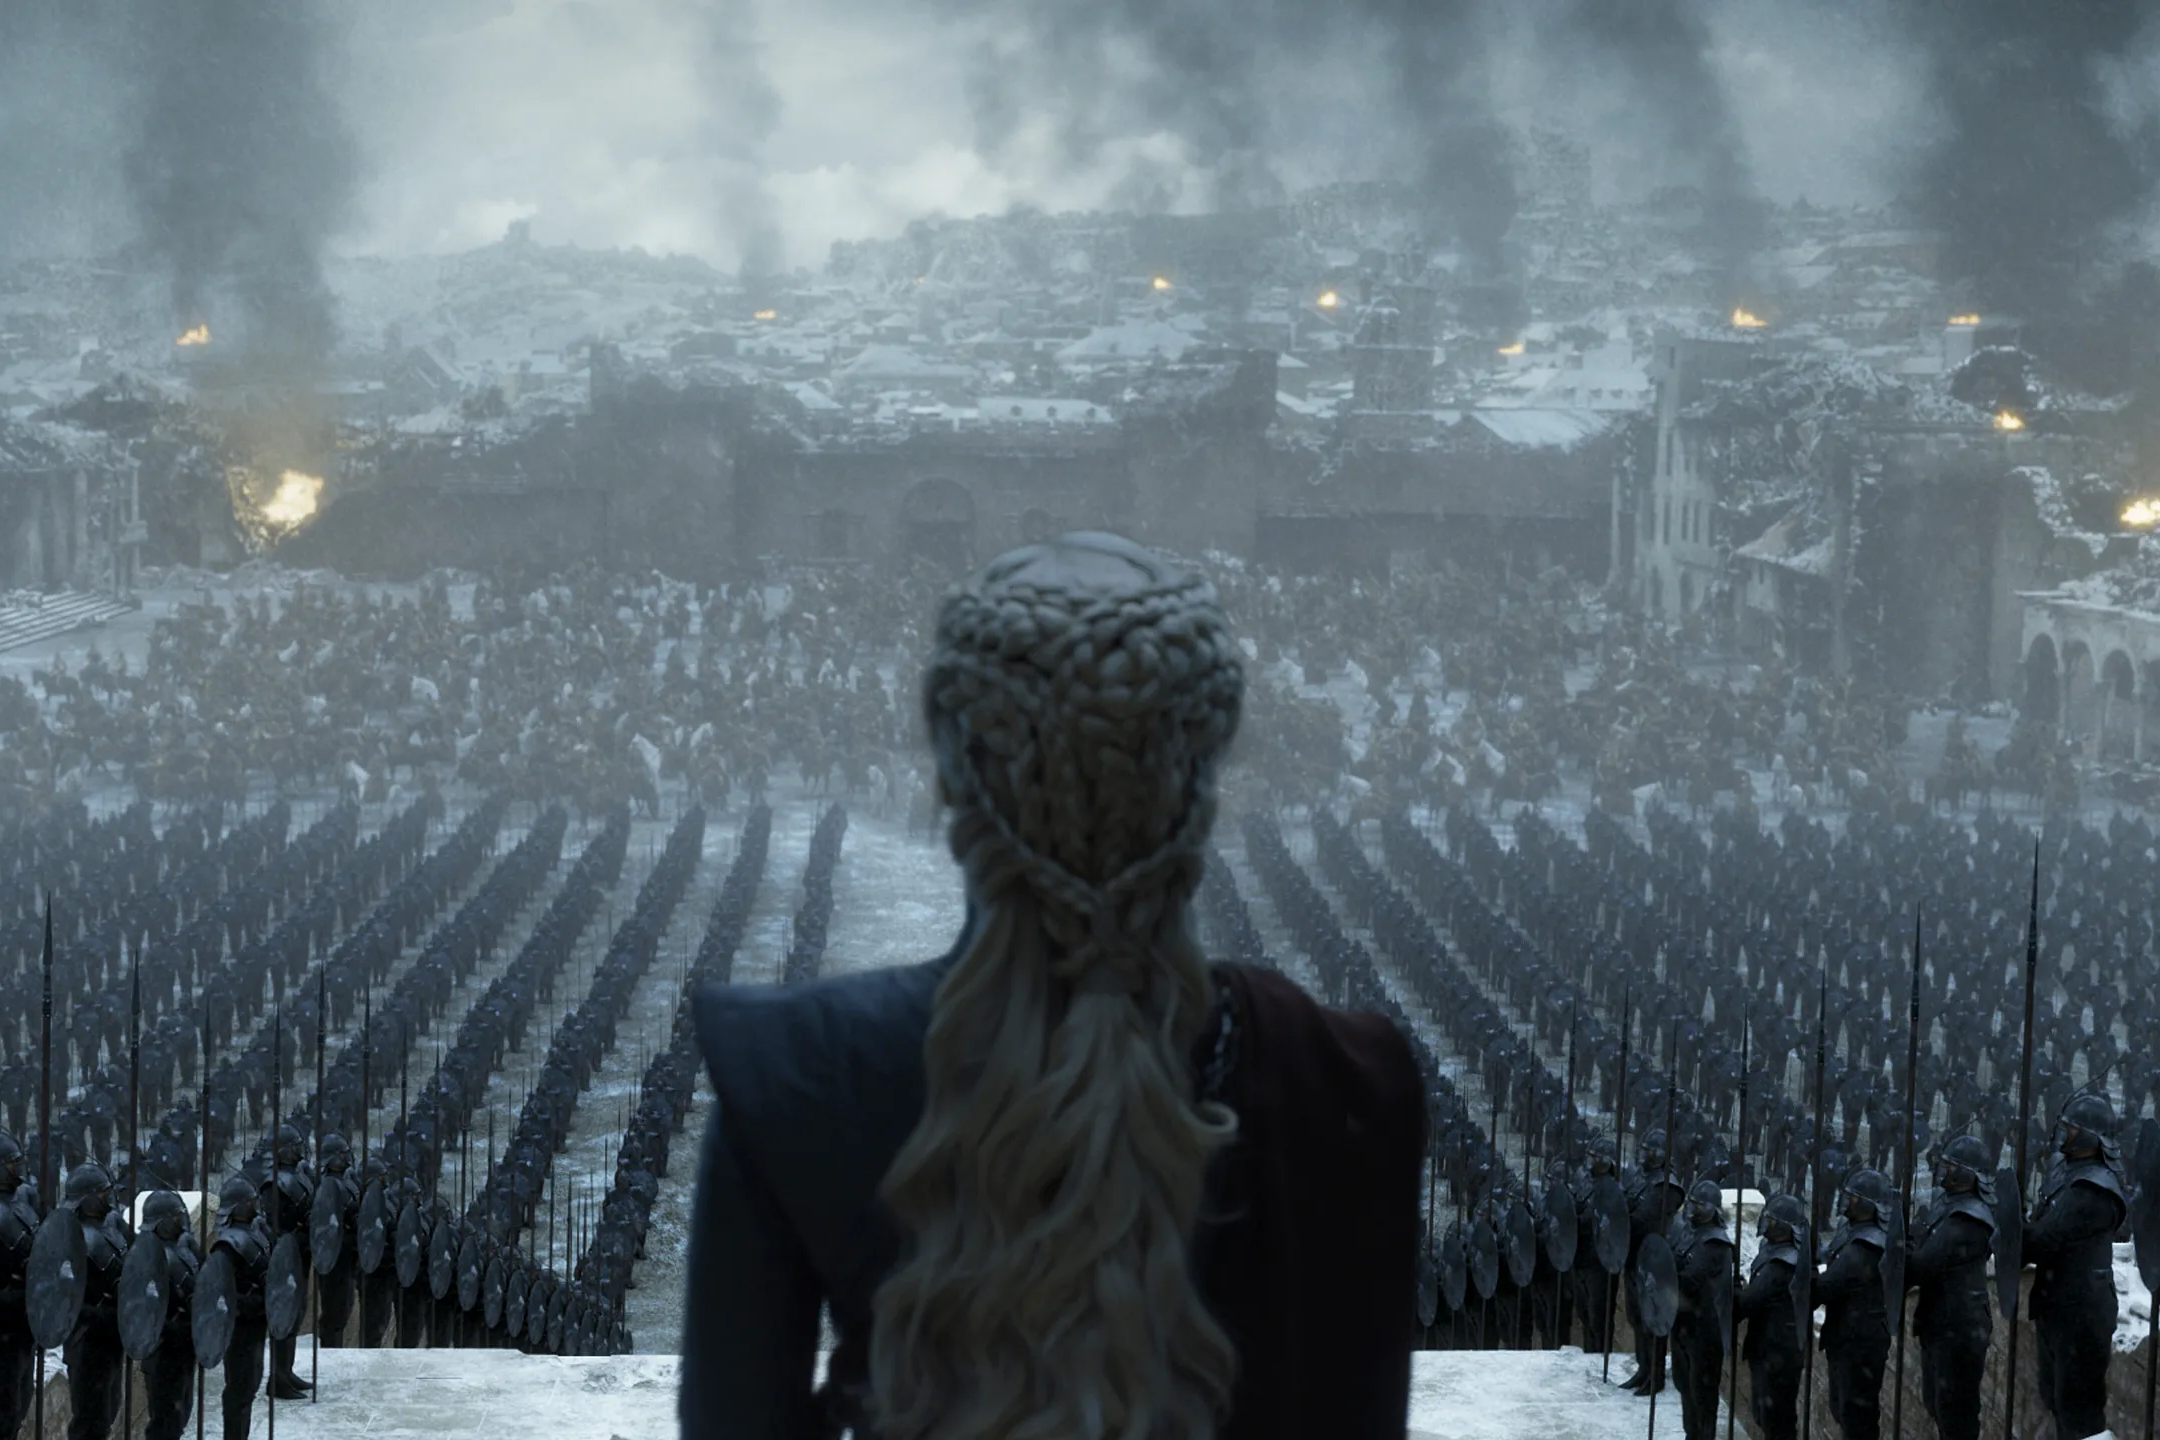 Daenerys stands above the Unsullied in the Game of Thrones finale.